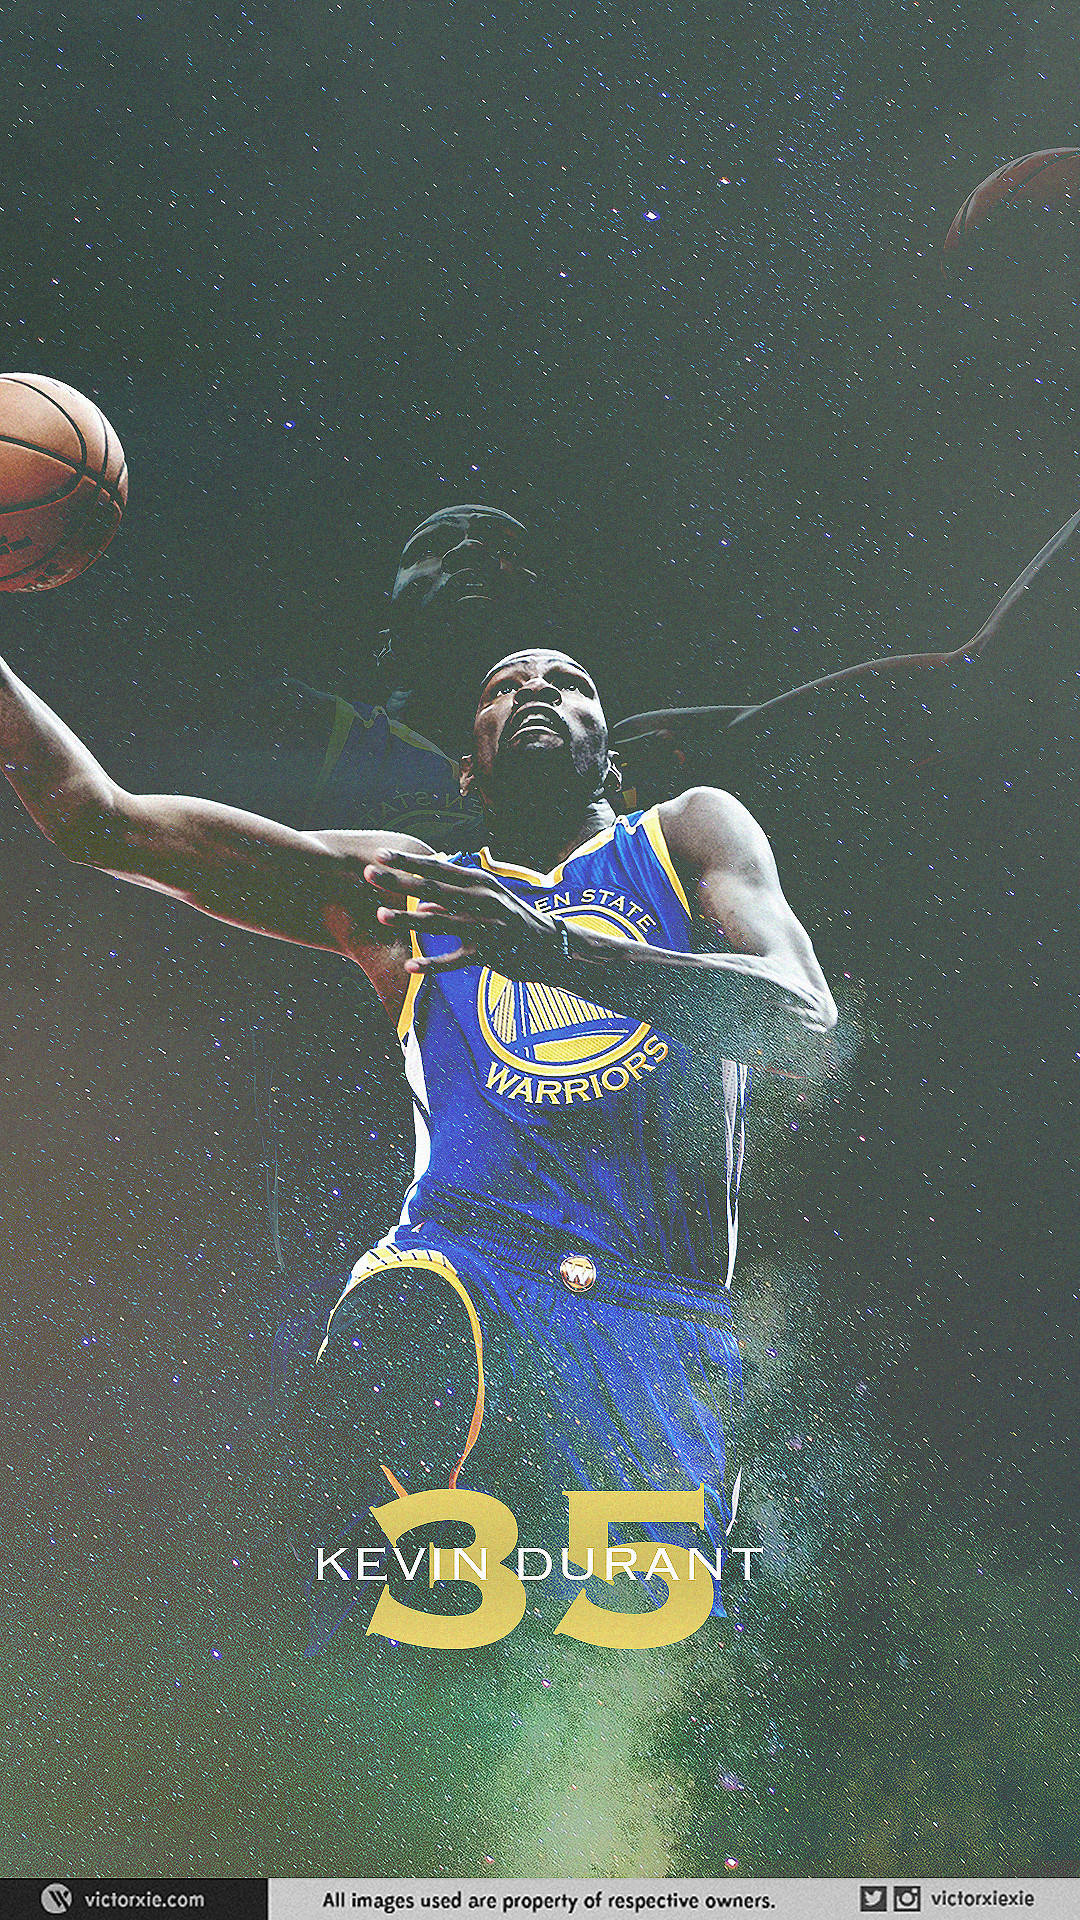 Stephen Curry Wallpaper 1080p » Hupages » Download Iphone Wallpapers